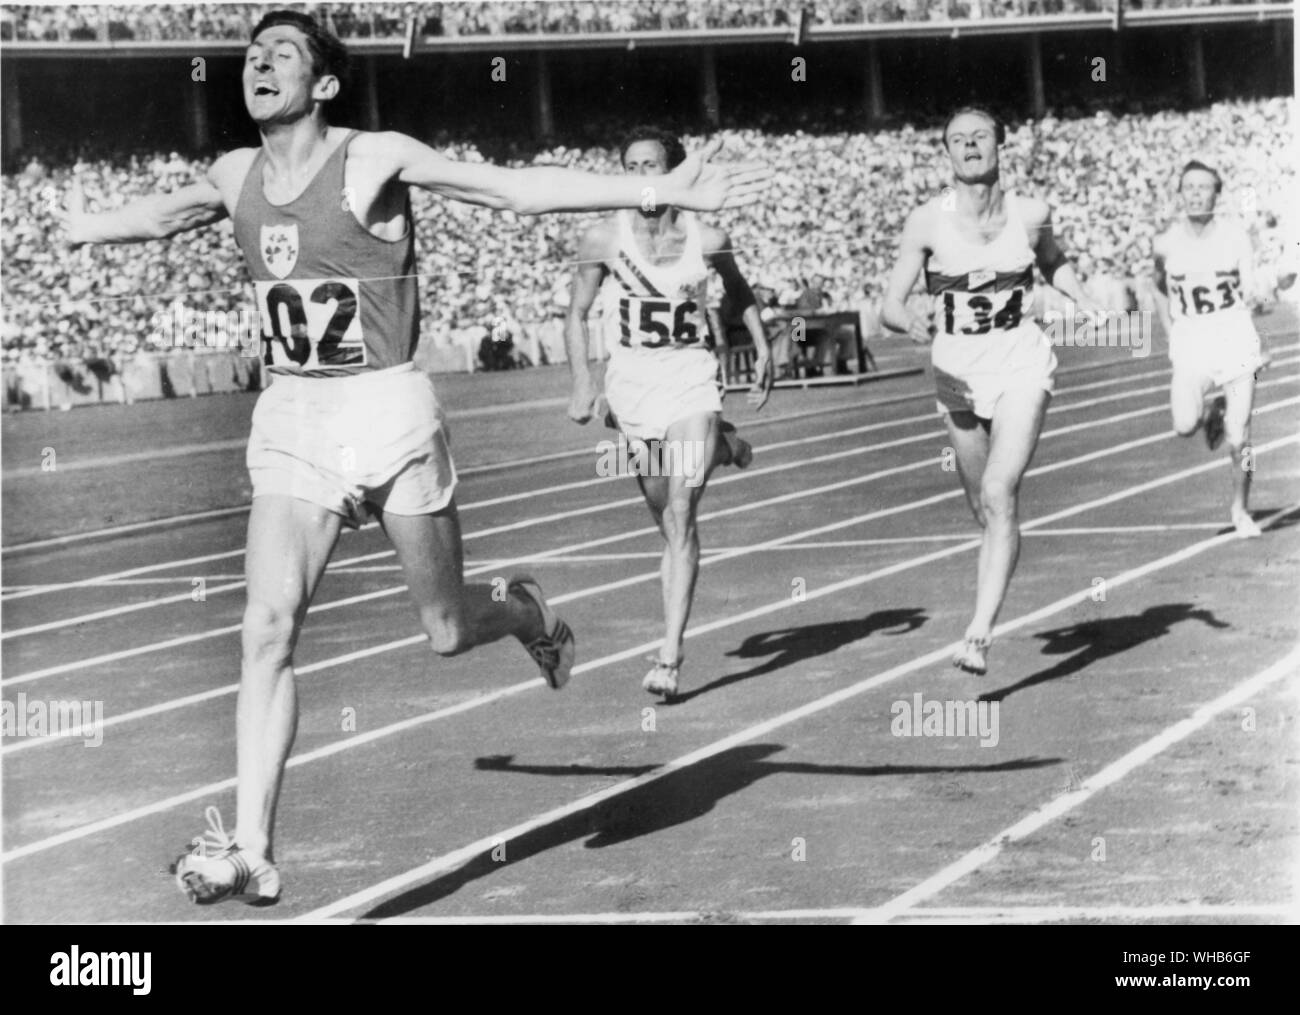 Aus., Melbourne, Olympics, 1956: Ron Delaney of Ireland wins the Olympic 1,500 metre race at Melbourne in a new Olympic Record time of 3:41.2 . Silver medal went to Walter Richtzenhain of Germany () and the bronze to John Landy (). . . . Stock Photo